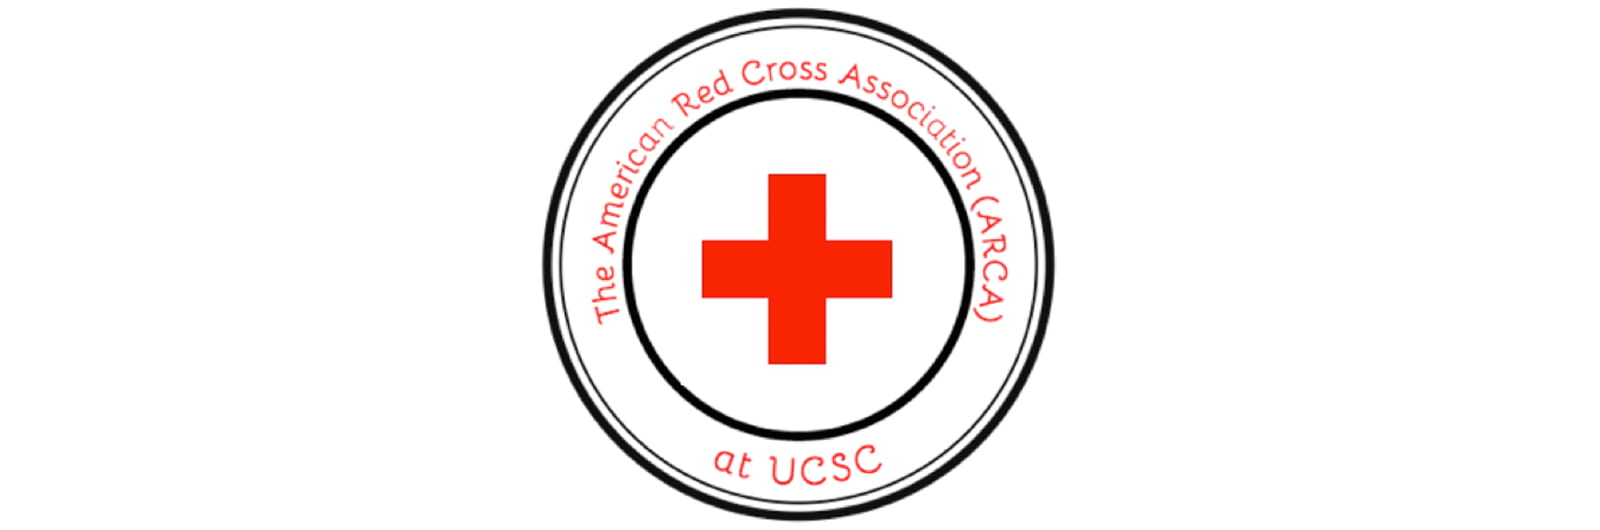 Text reads "American Red Cross Association (ARCA) at UCSC